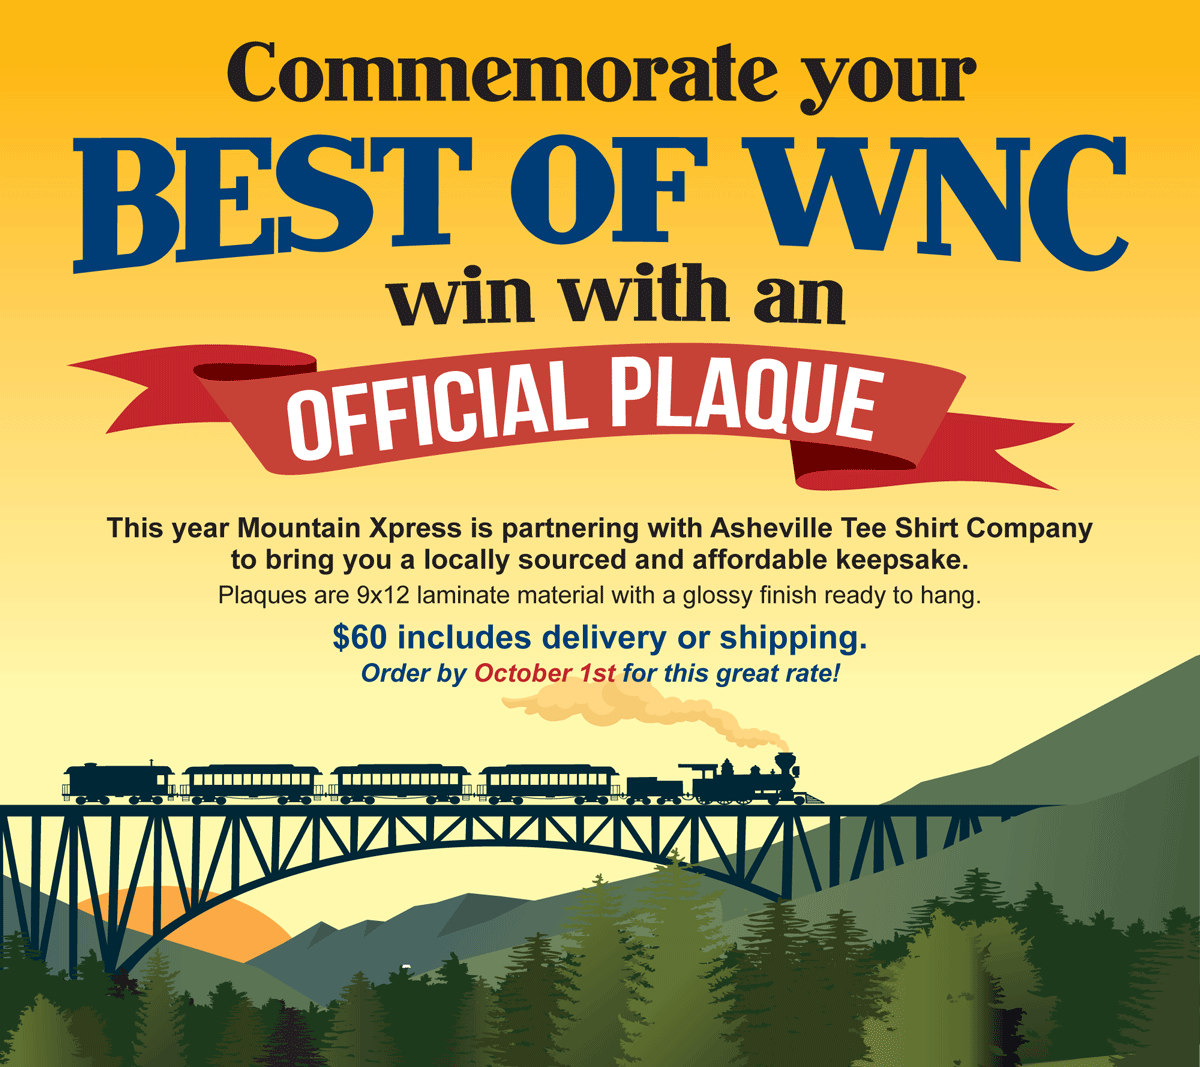 Best Of WNC Award Plaques Mountain Xpress